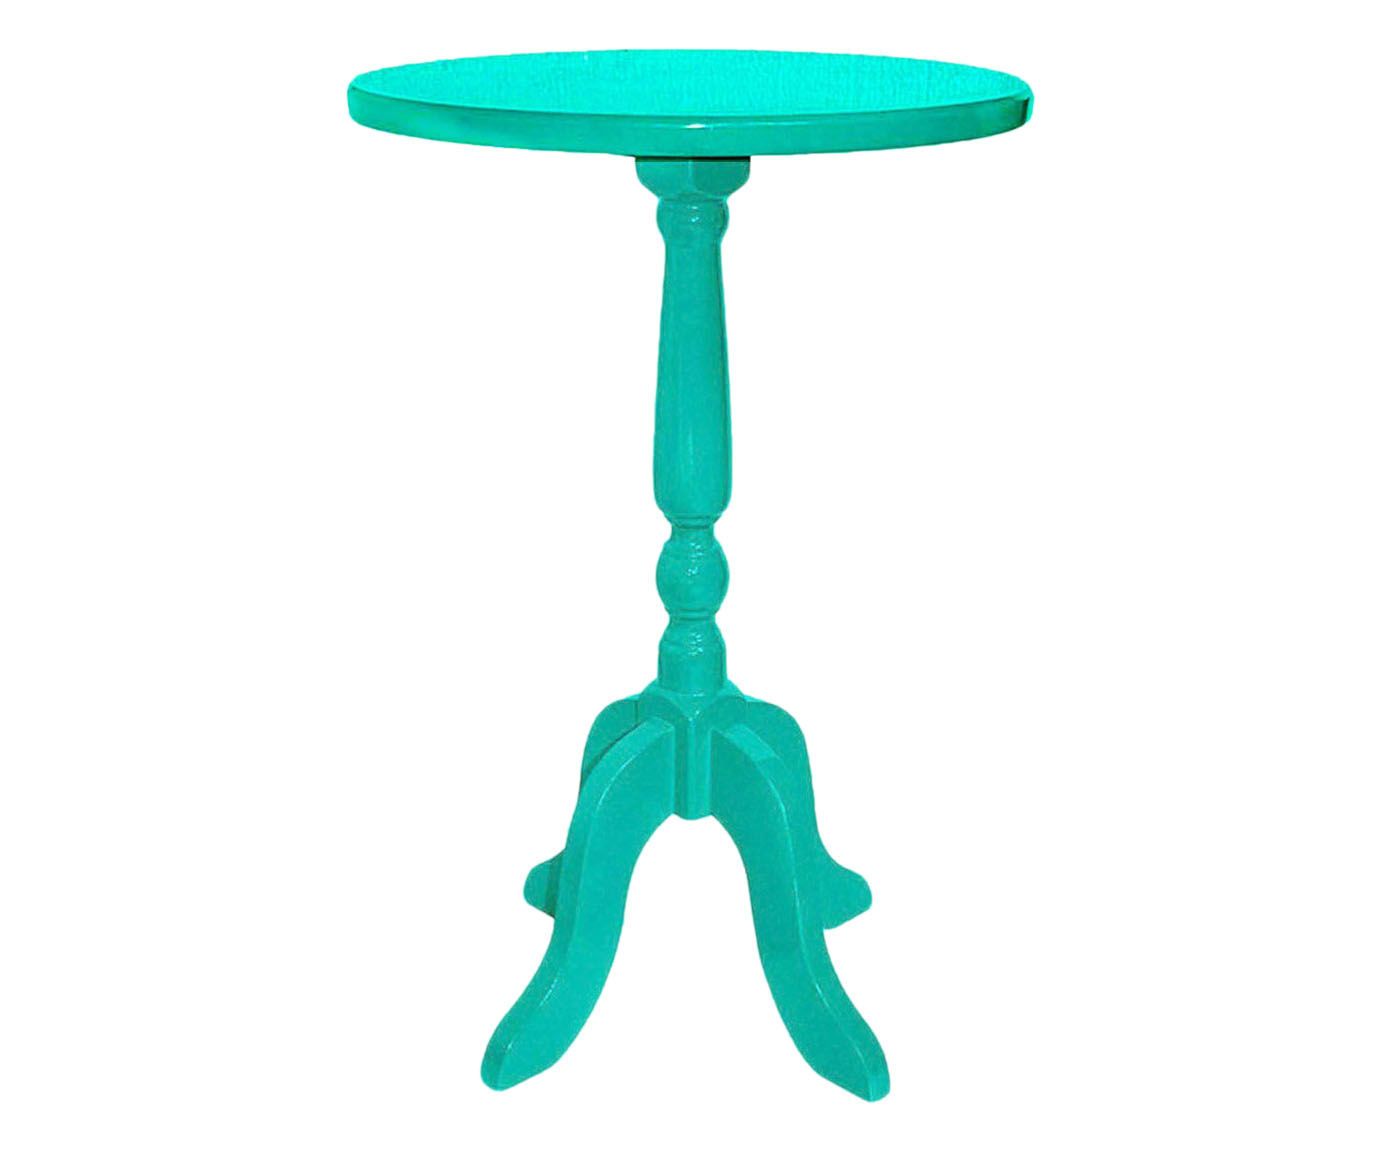 MESA LATERAL CLASSIC CHARM - VERDE | Westwing.com.br